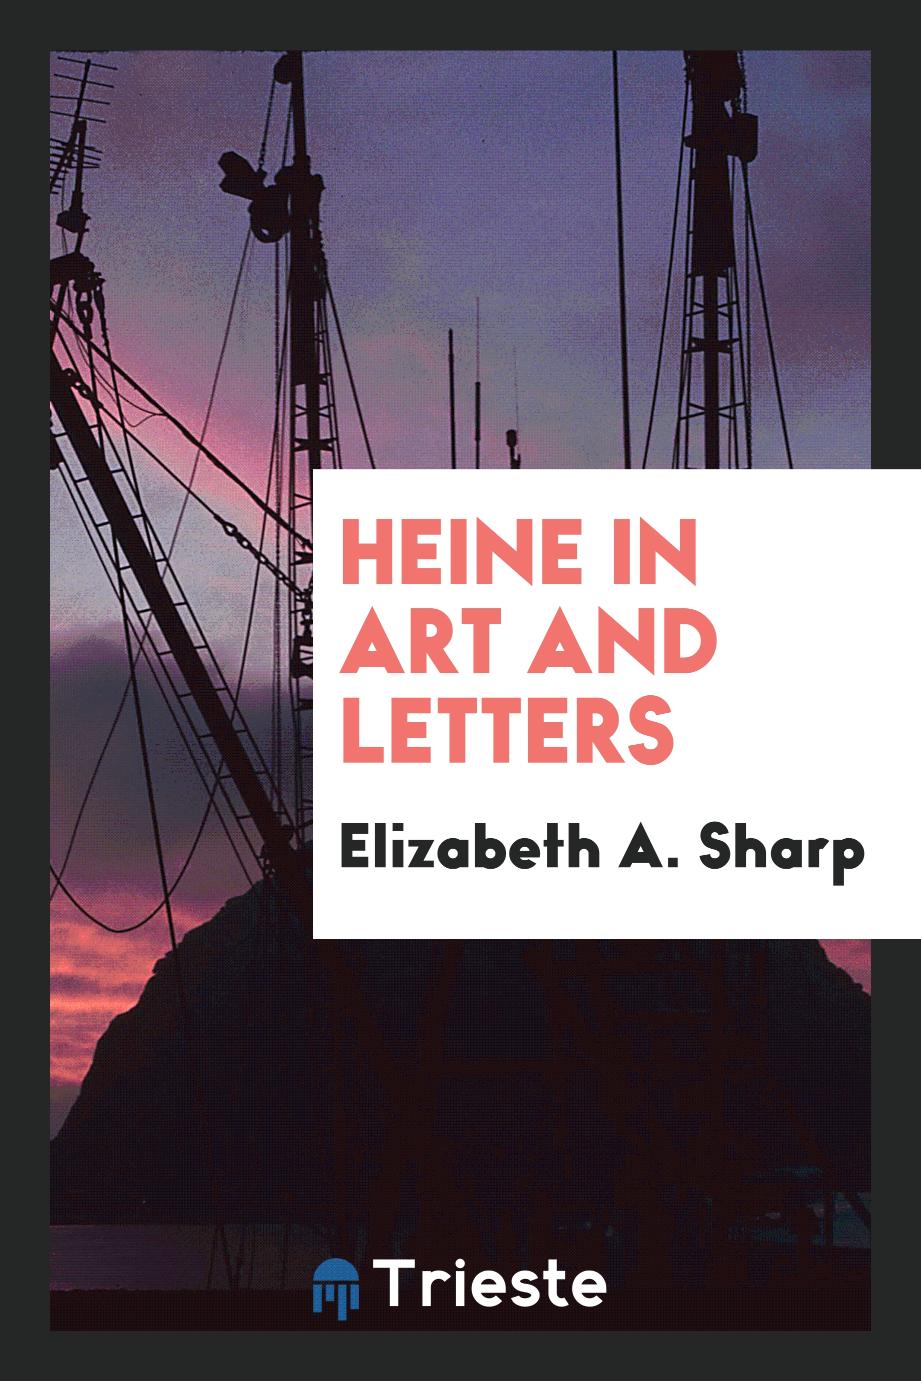 Heine in art and letters